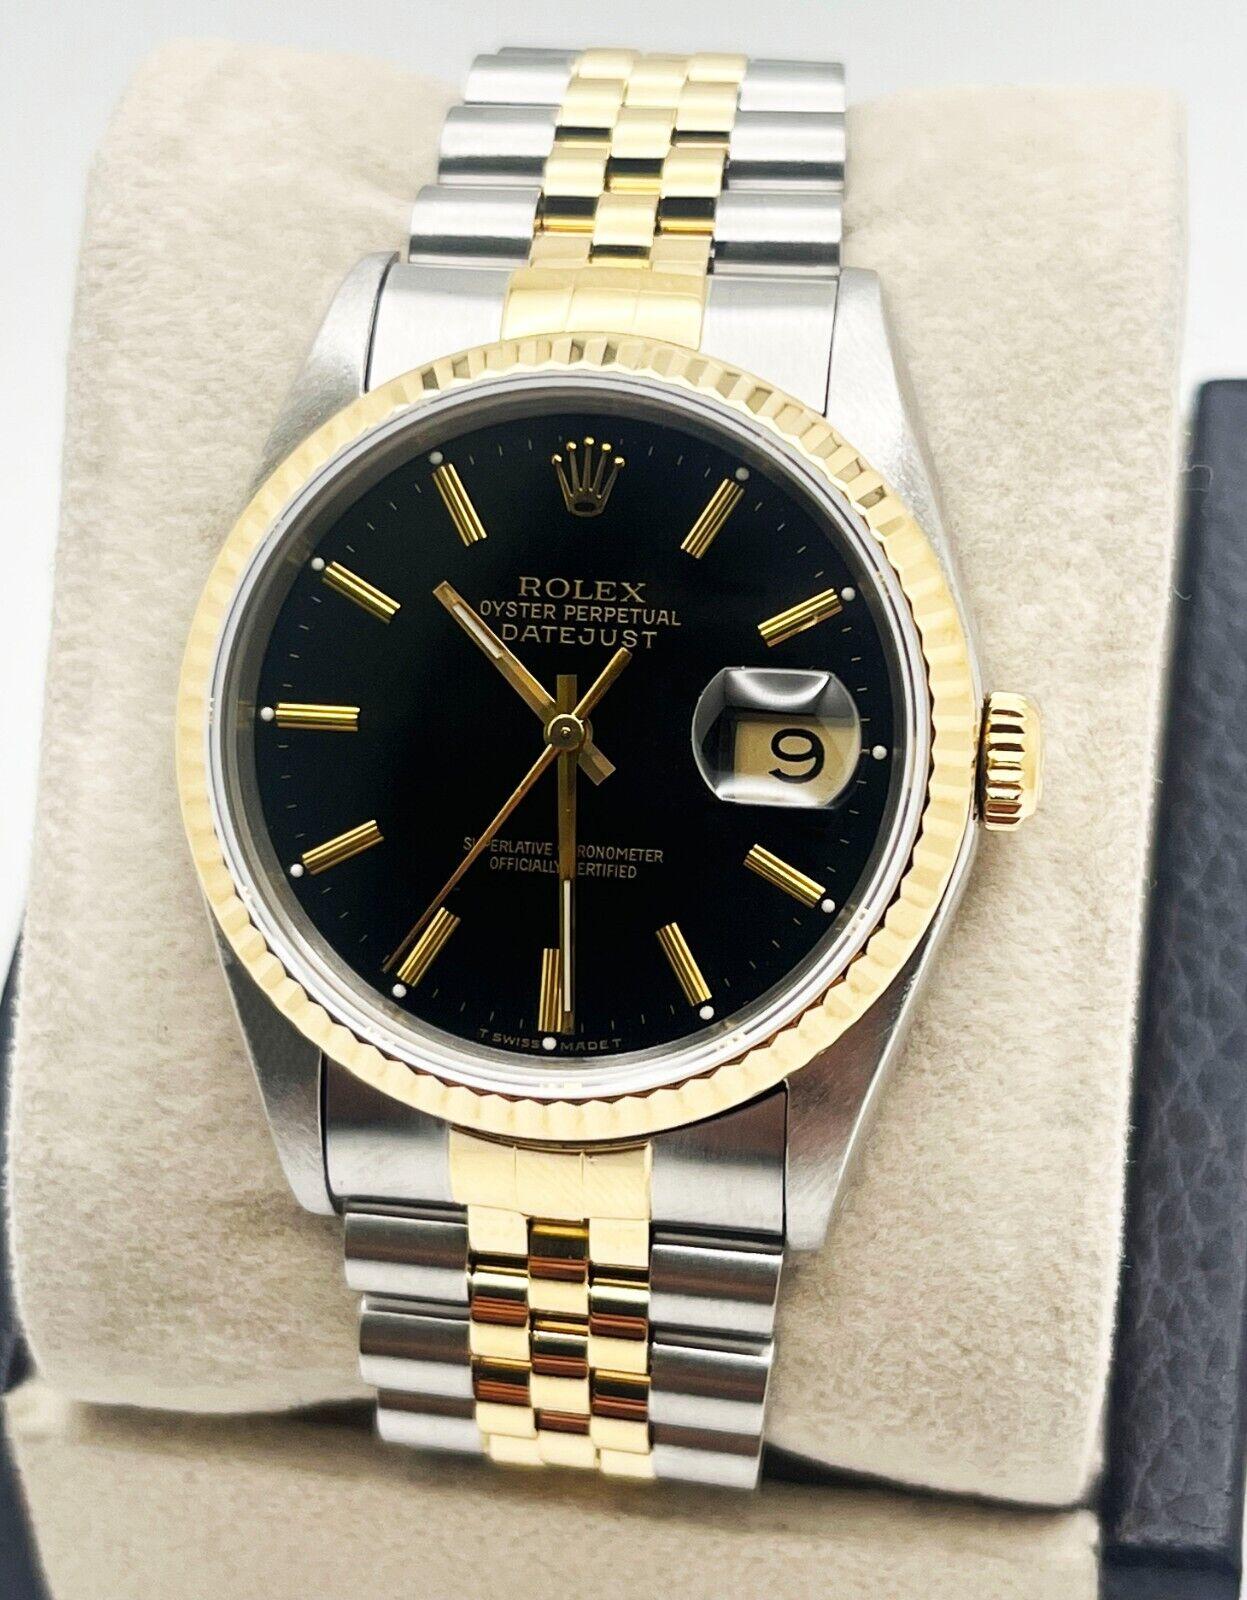 Rolex Datejust 16233 Black Dial 18K Yellow Gold Stainless Steel In Excellent Condition For Sale In San Diego, CA